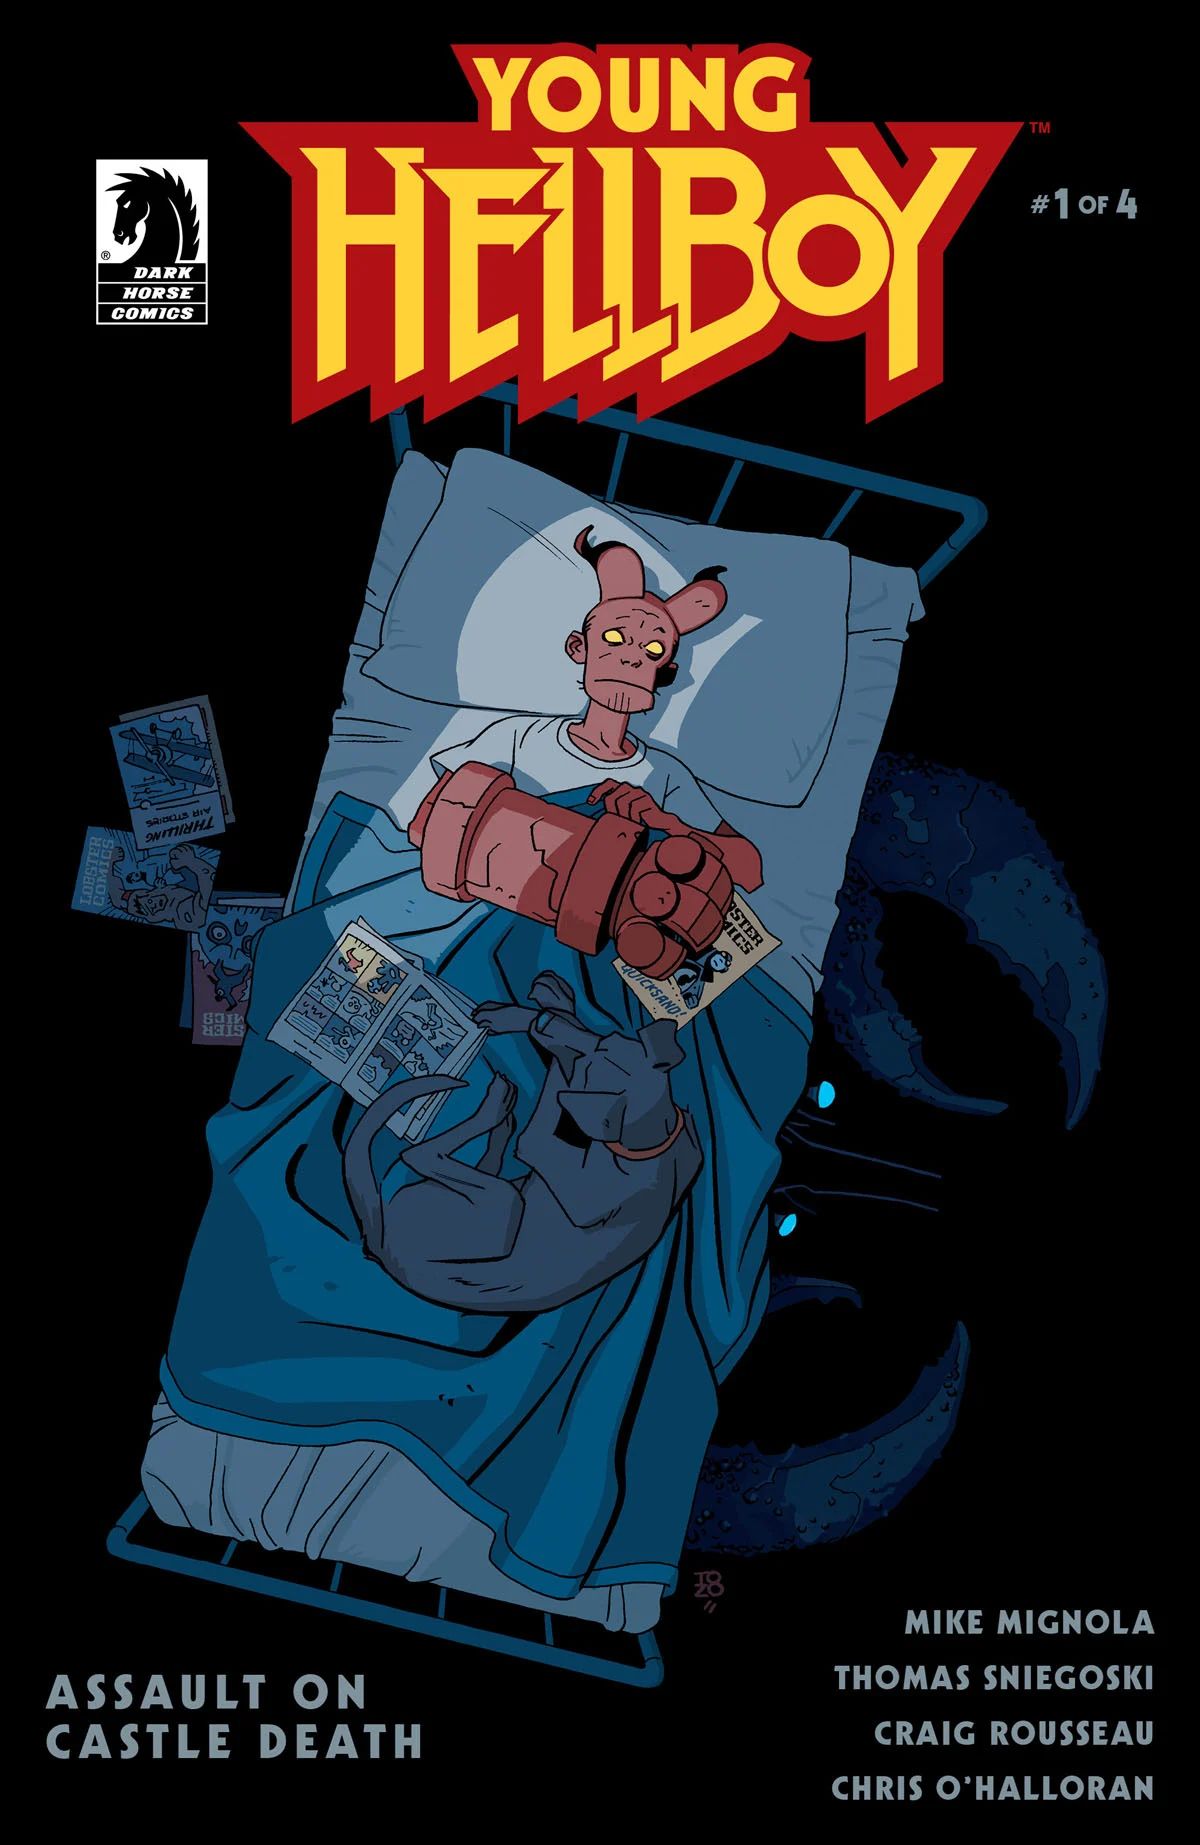 Young-Hellboy-Assault-on-Castle-Death-Cover-B - Copy